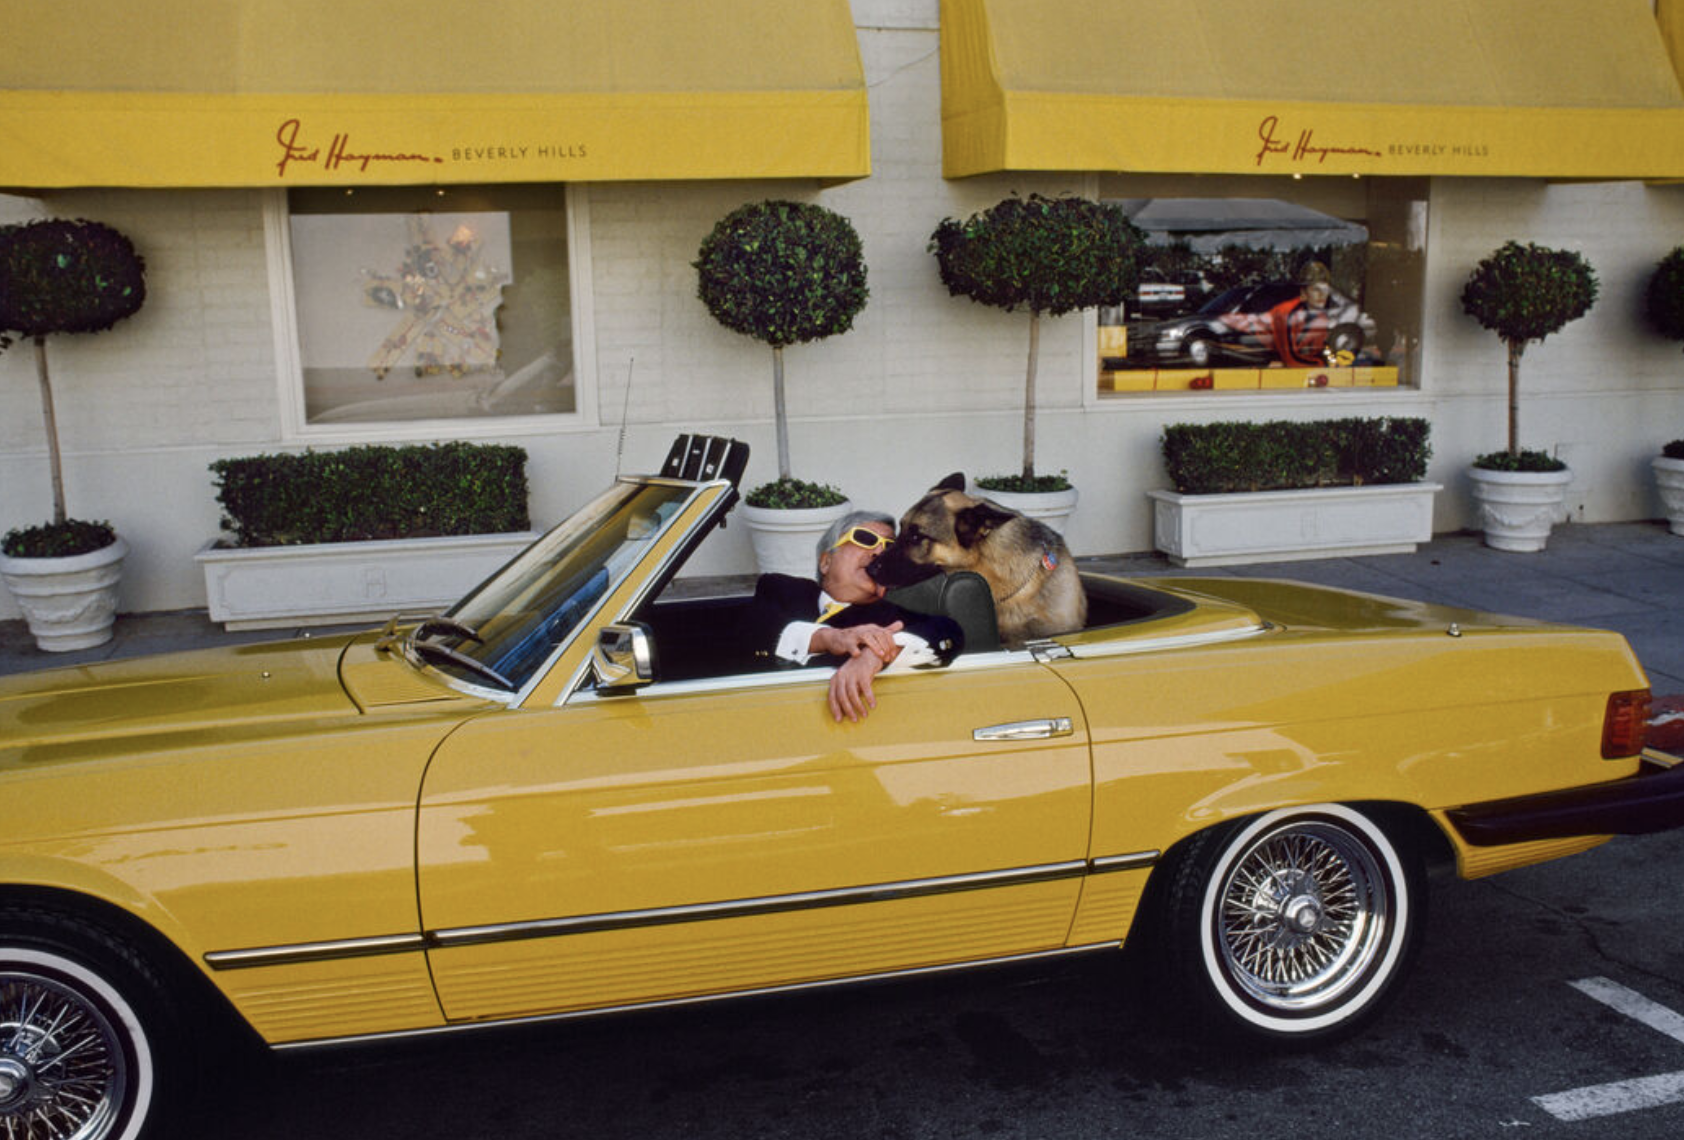 Man seen kissing a dog as they both sit in a bright yellow convertible